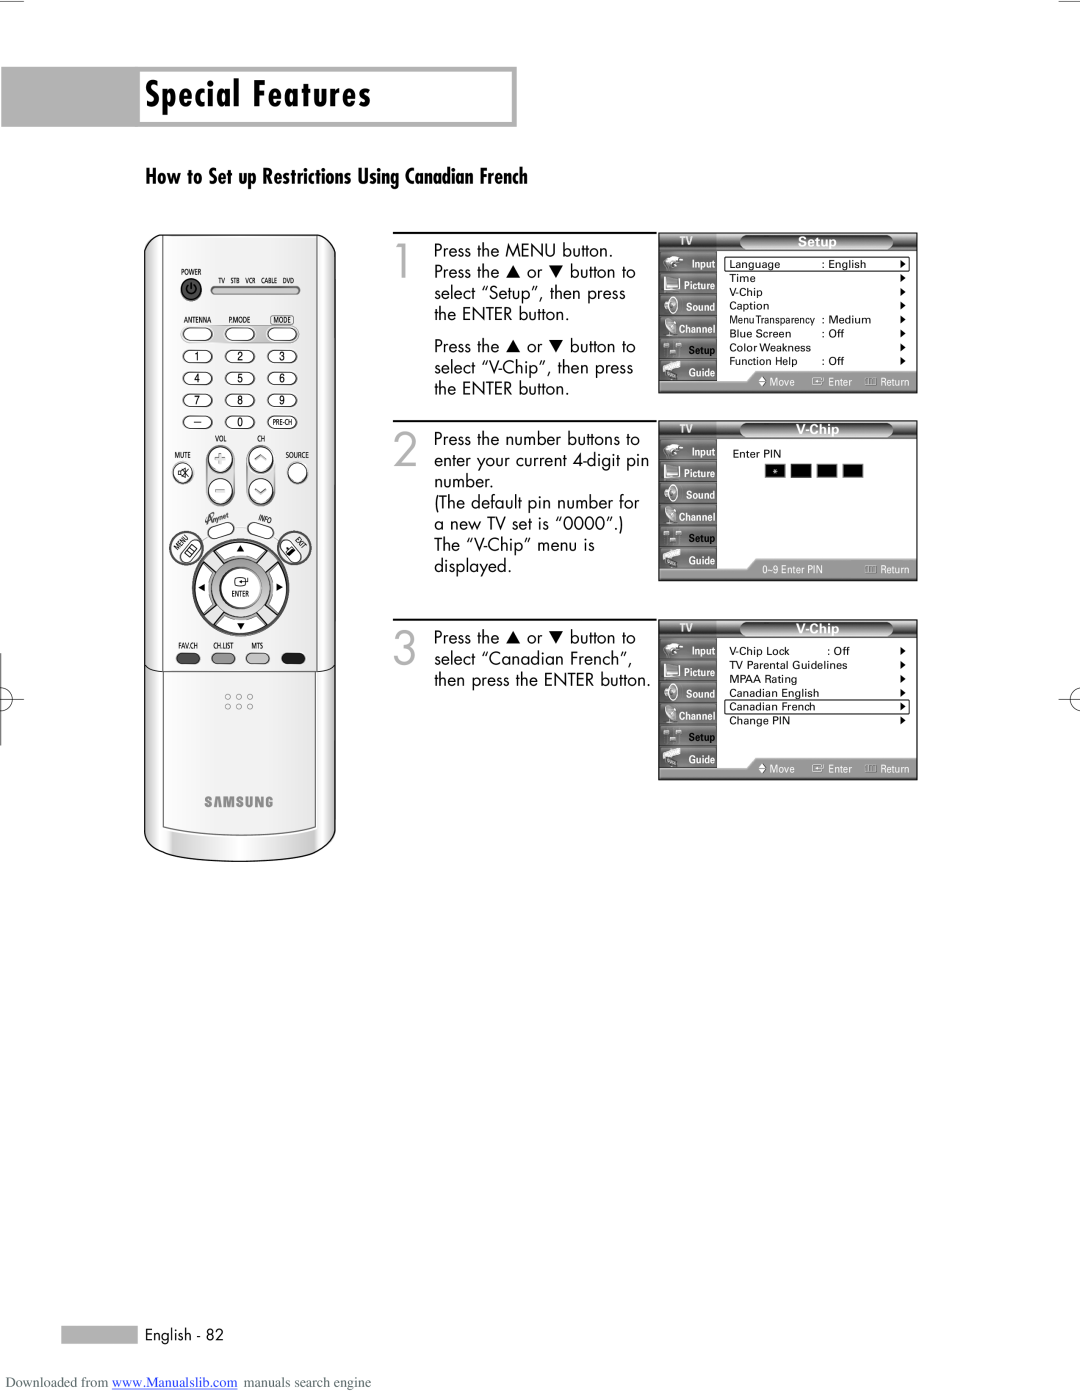 Samsung HL-R5656W, HL-R6156W, HL-R5056W manual How to Set up Restrictions Using Canadian French, Special Features 